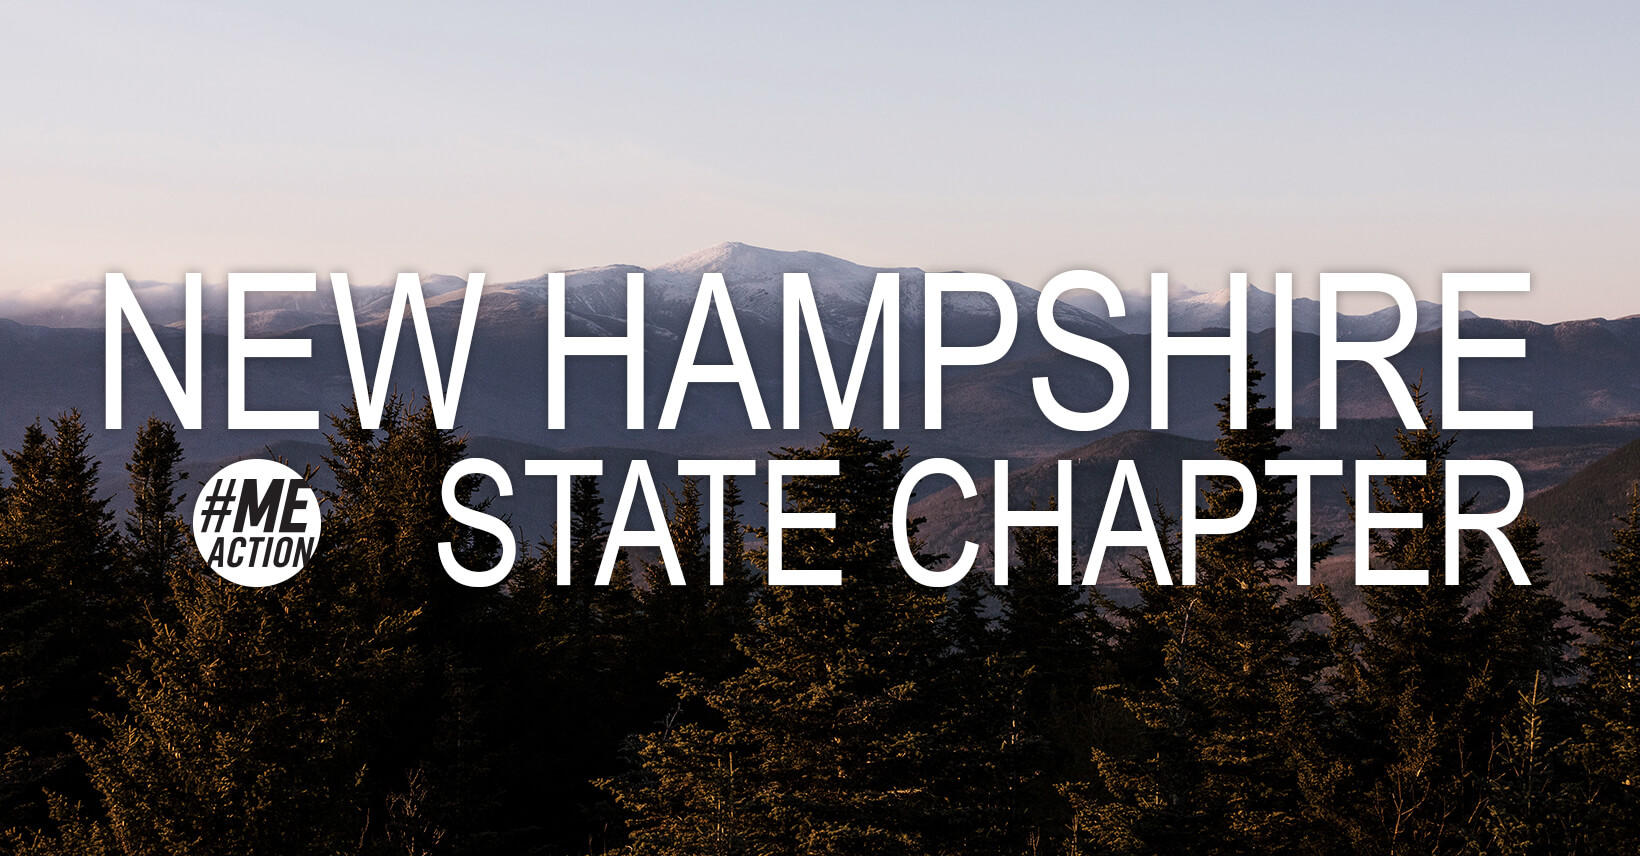 The words New Hampshire State Chapter written over a scene with pine trees and mountains in the background